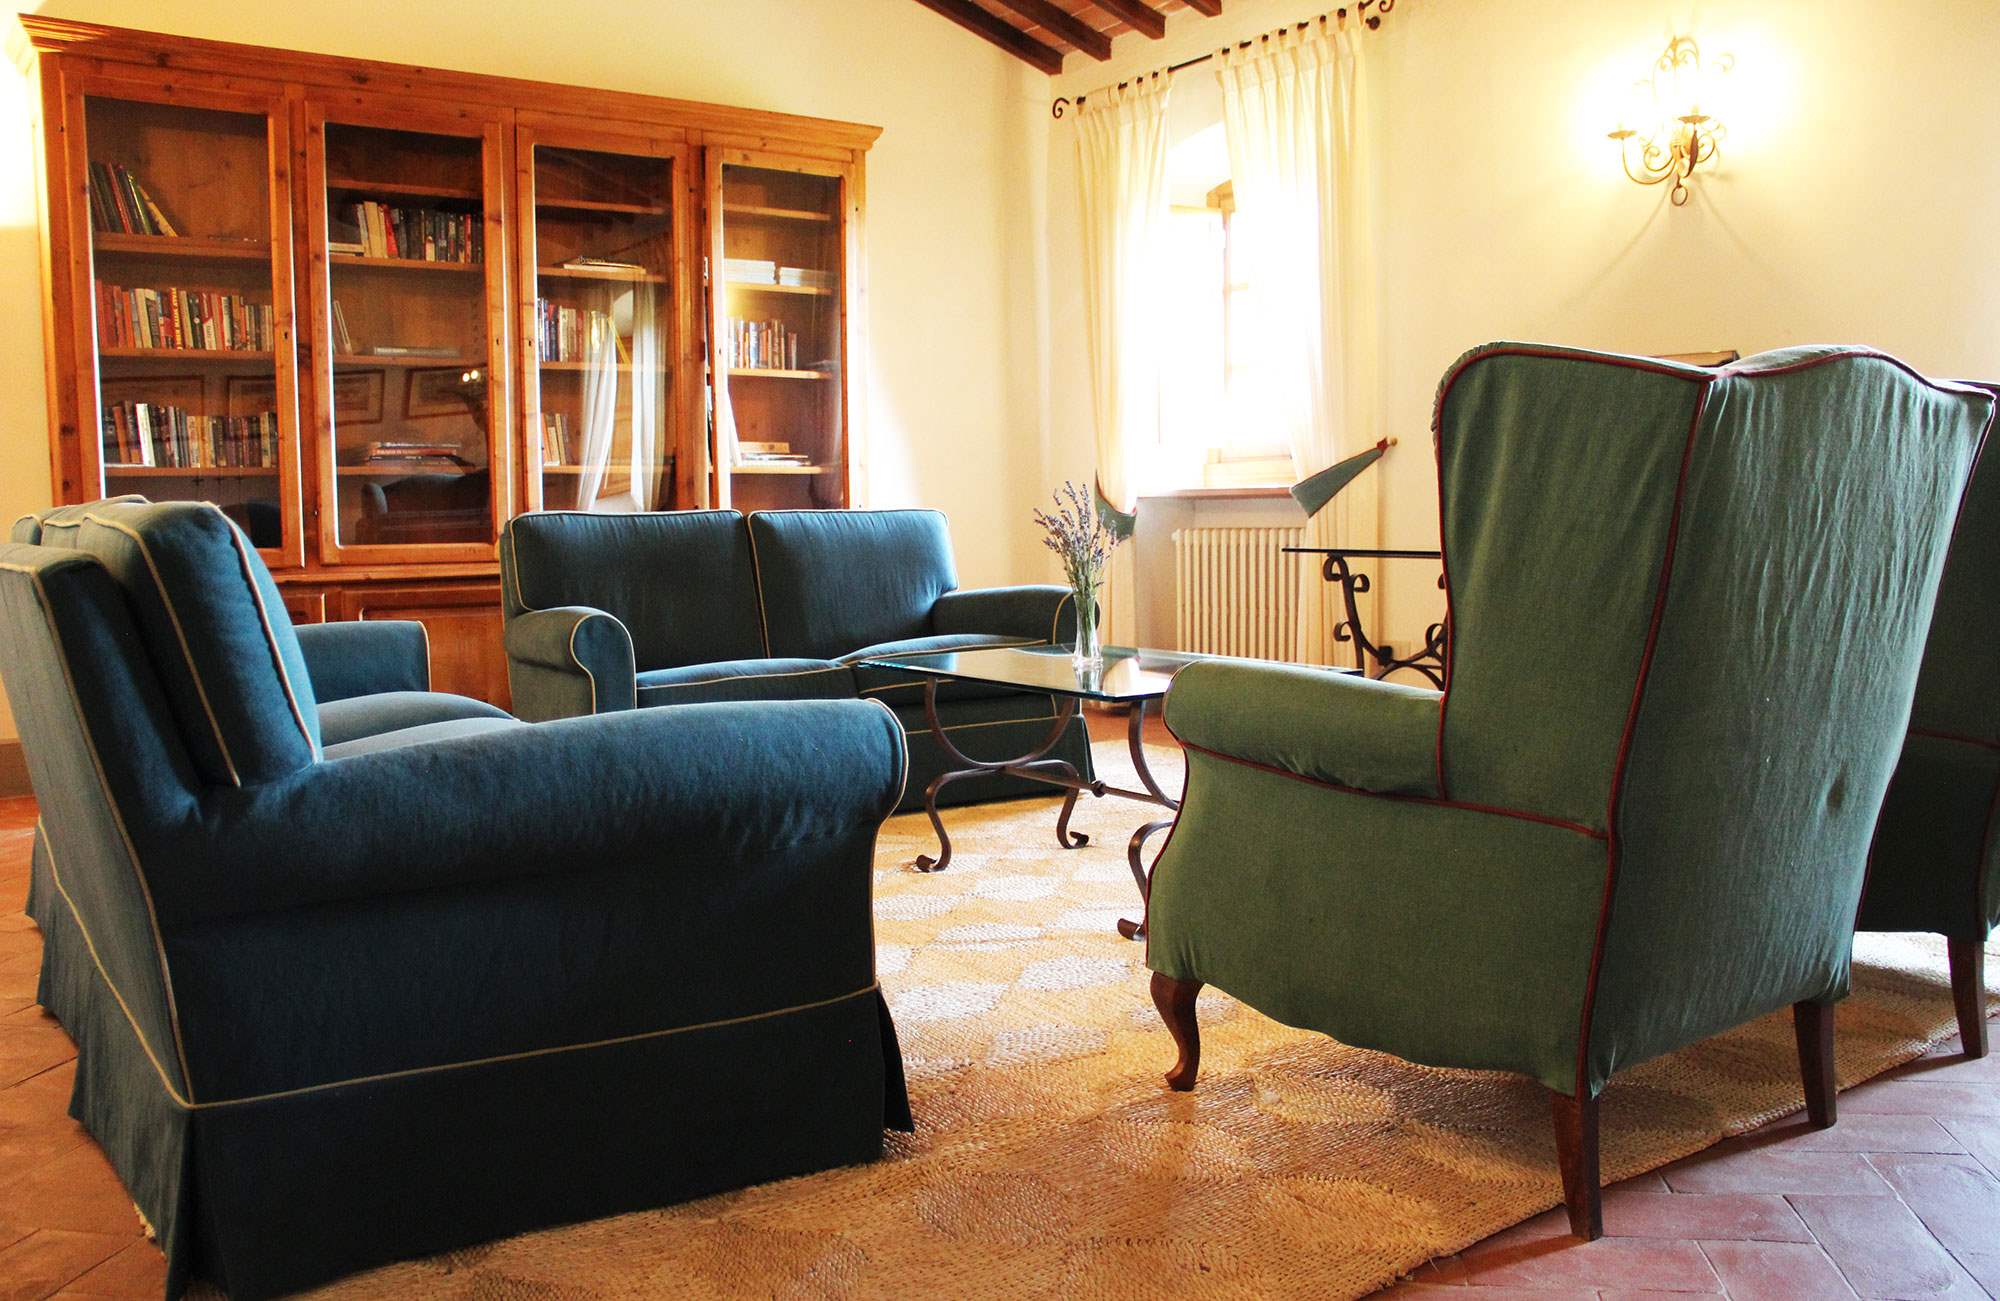 Apartment Loggia, 4 bedroom apartment in Chianti & Countryside, Tuscany Photo #4